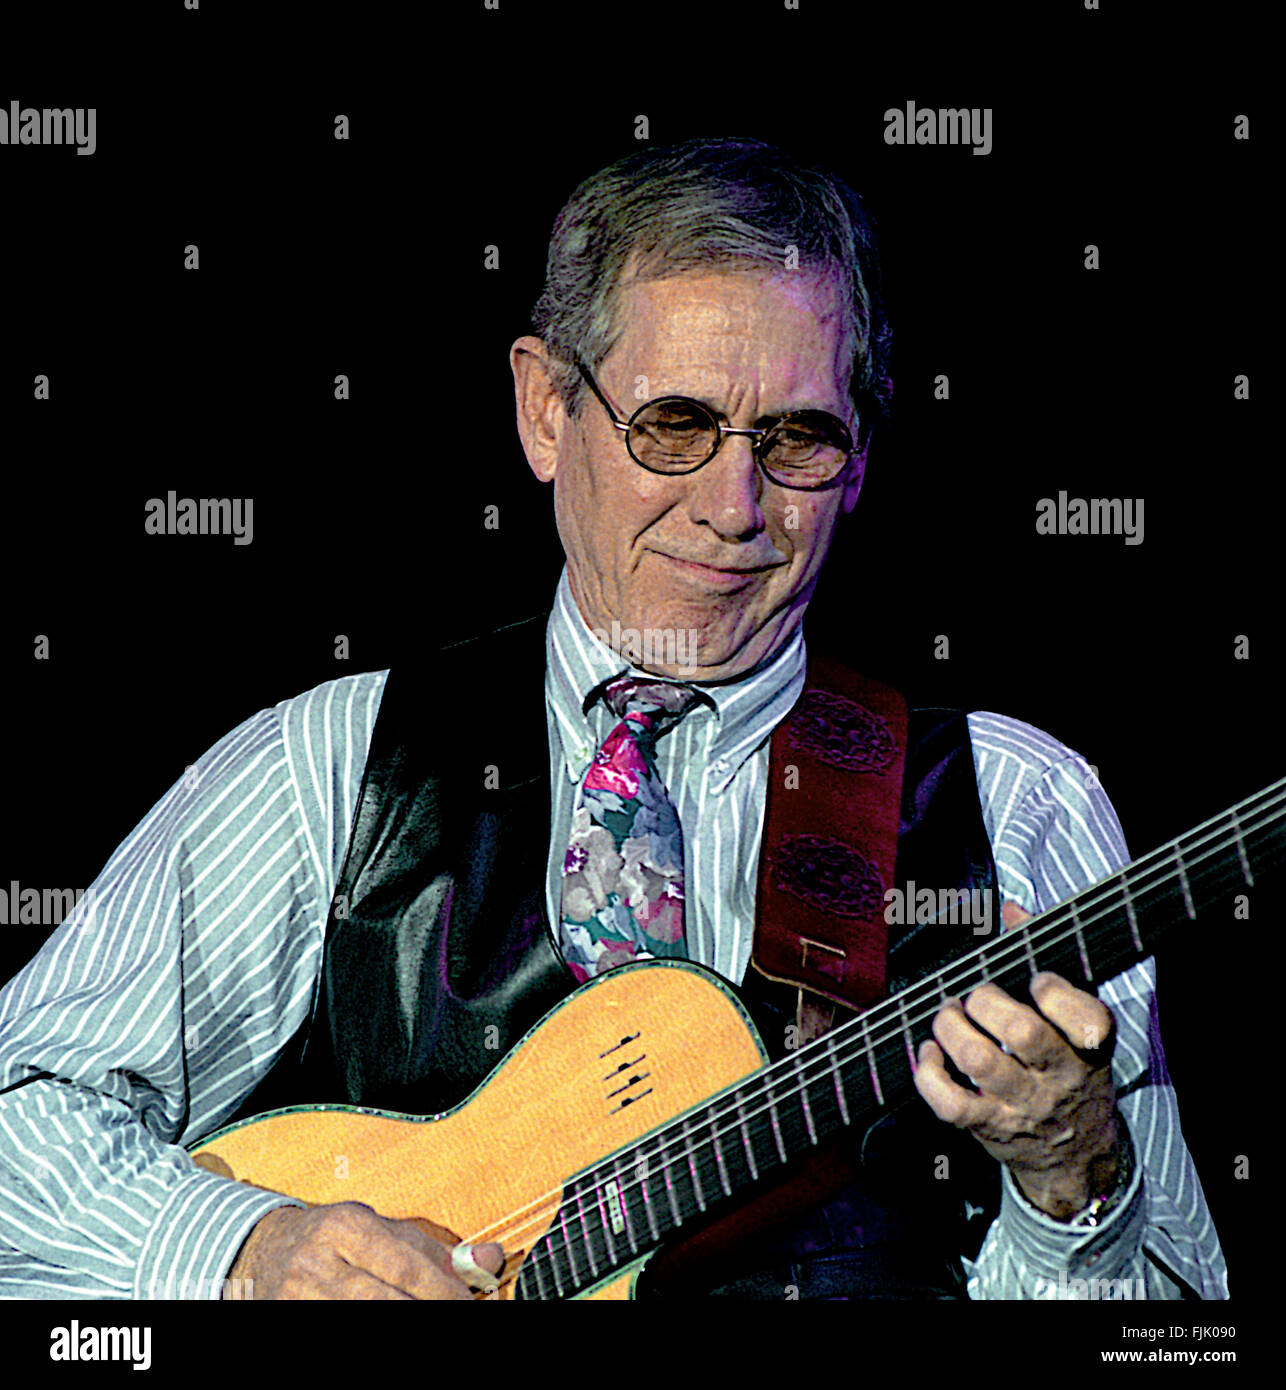 Washington, DC., USA, 21th March, 1992 Guitarist Chet Atkins with the Flecktones live during the 50th anniversary show from the studios' of Voice of America. Credit: Mark Reinstein Stock Photo